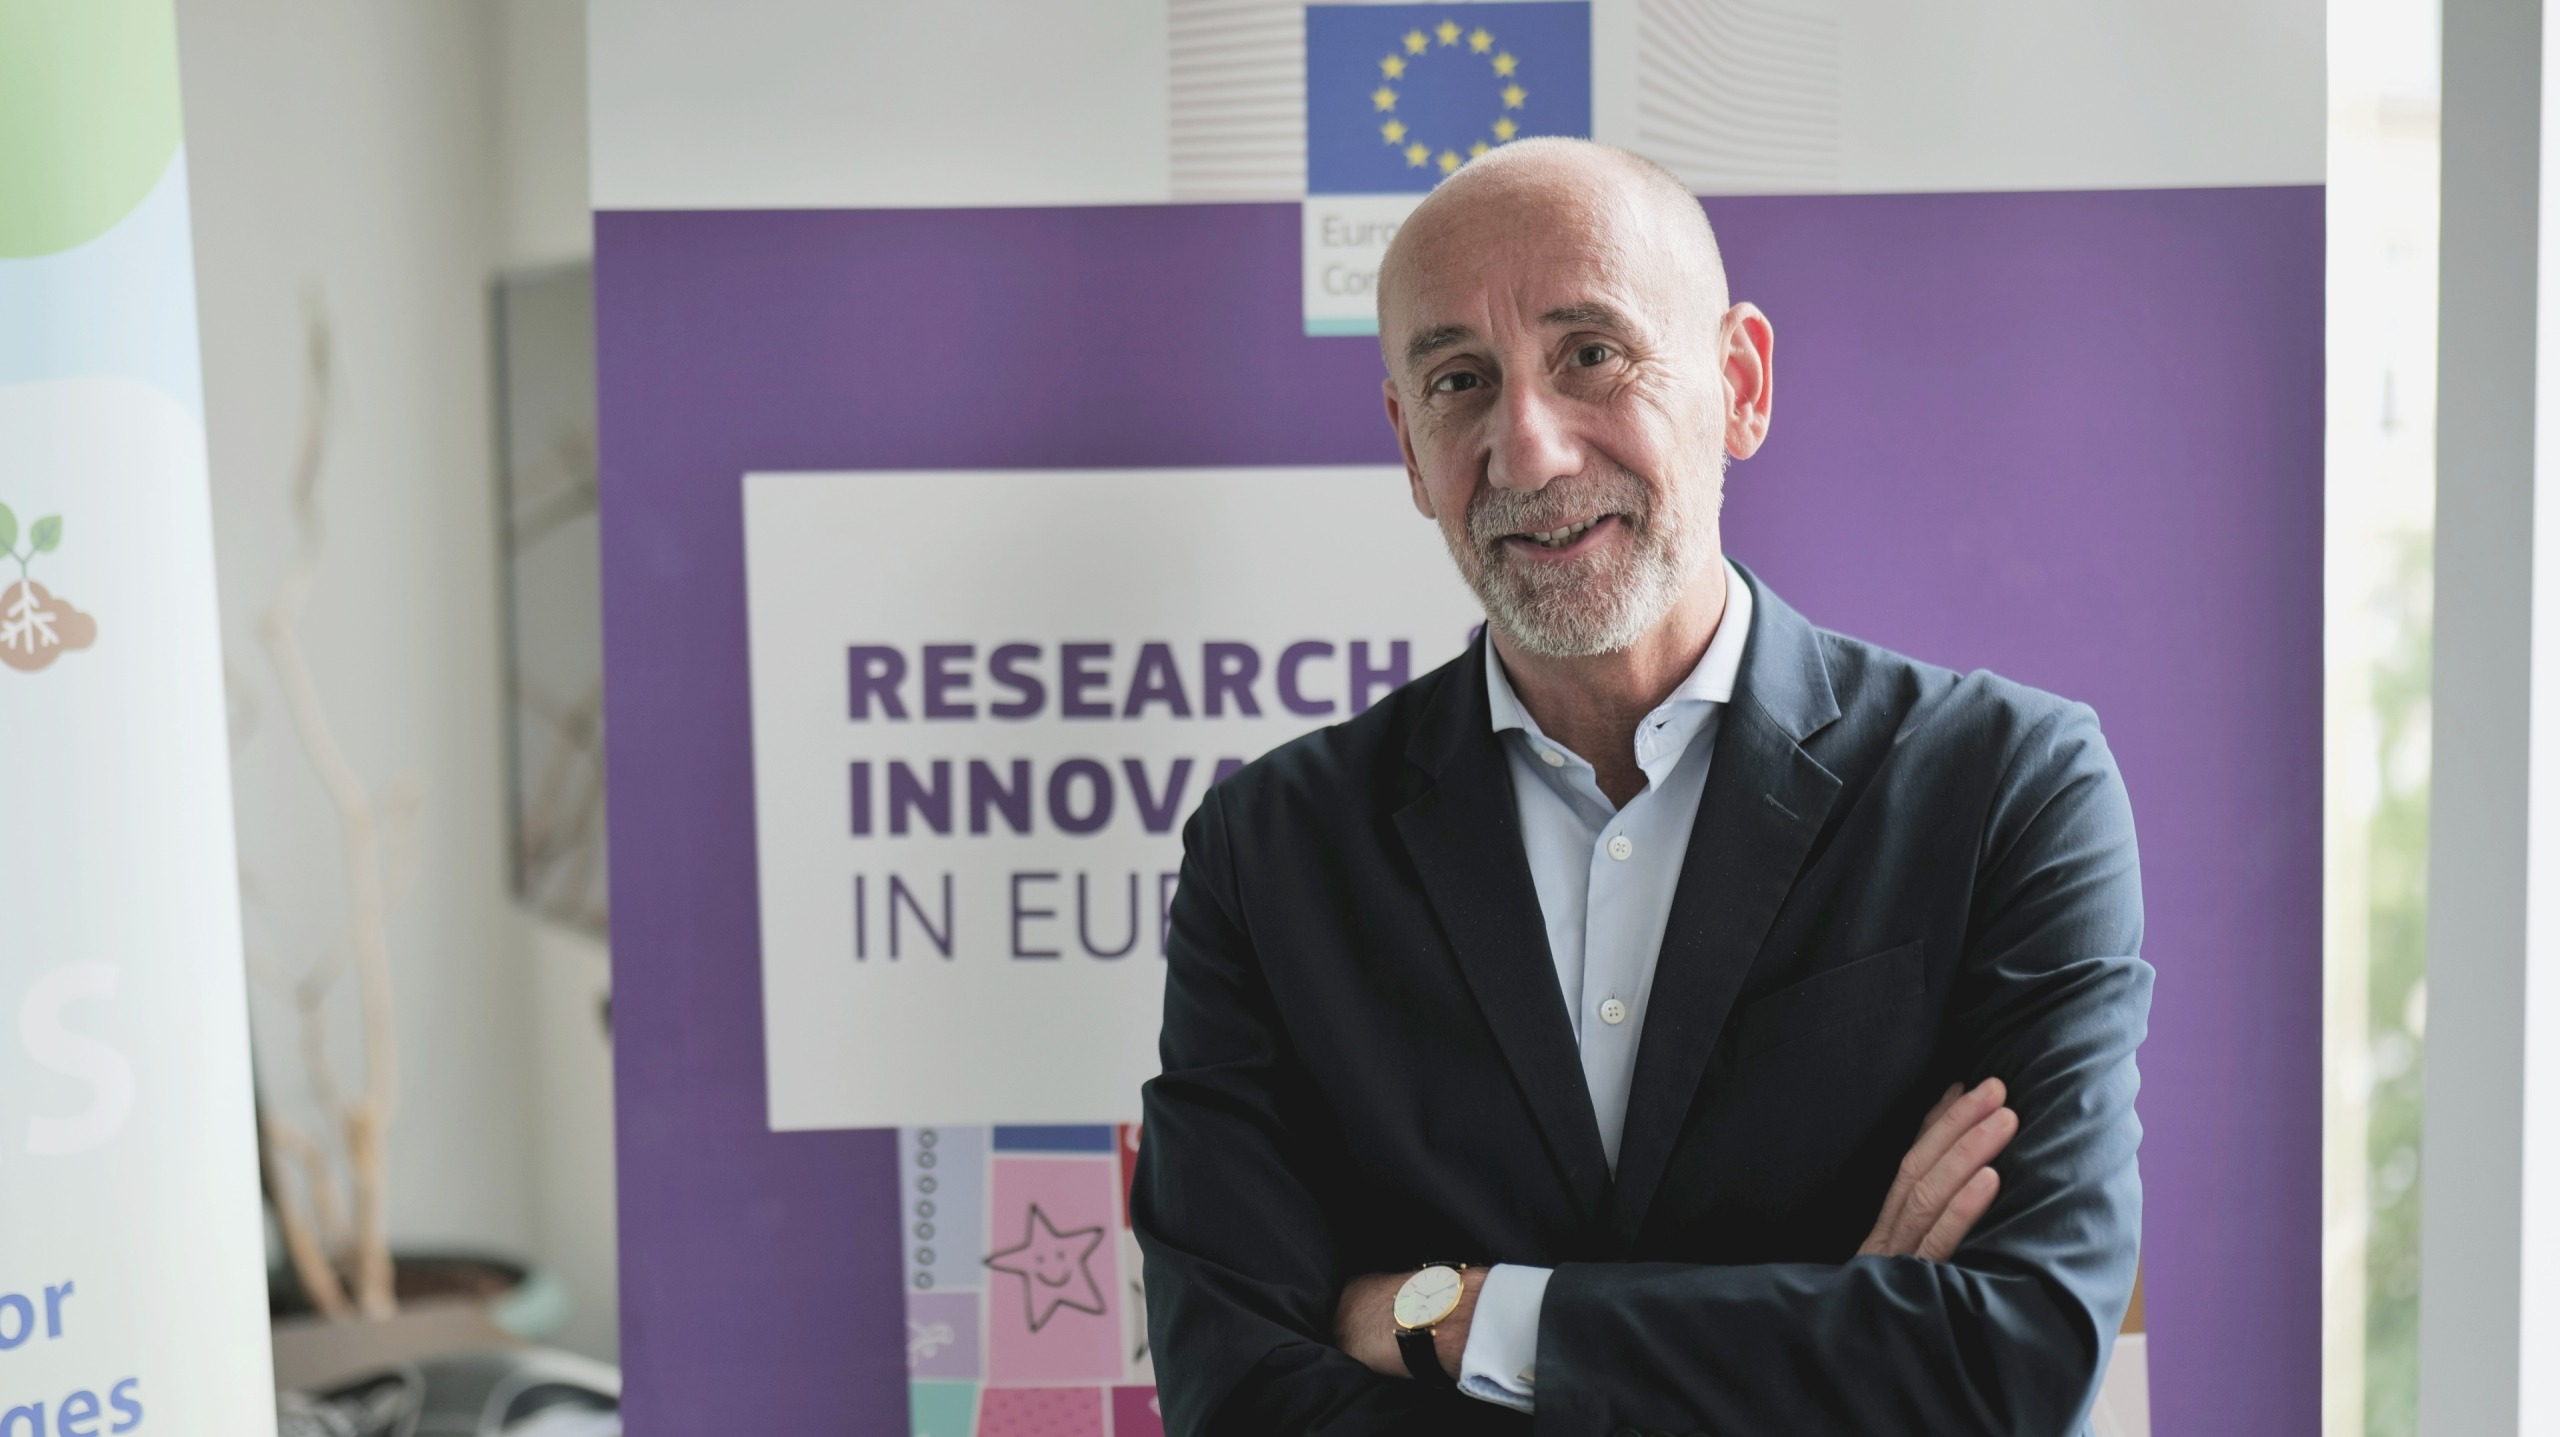 Director-General Jean-Eric Paquet, European Commission Directorate-General for Research and Innovation © Kevin Casey, 2022